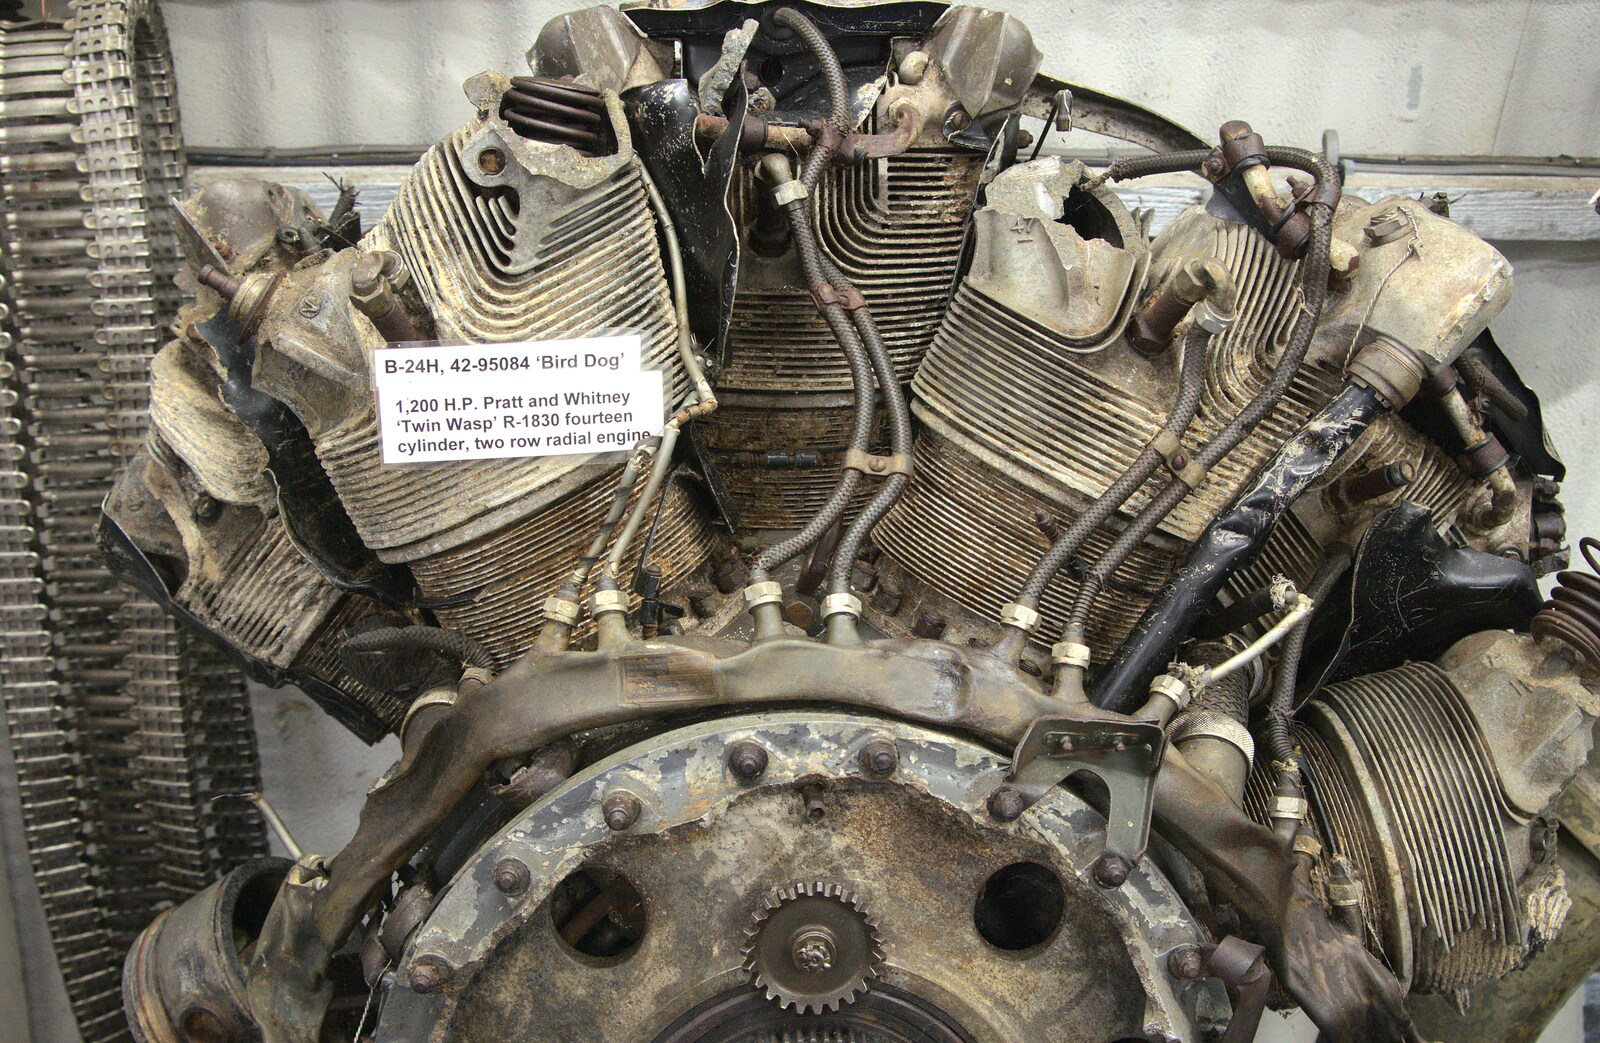 The remains of an engine from Liberator 'Bird Dog' from Norfolk and Suffolk Aviation Museum, Flixton, Suffolk - 30th April 2017